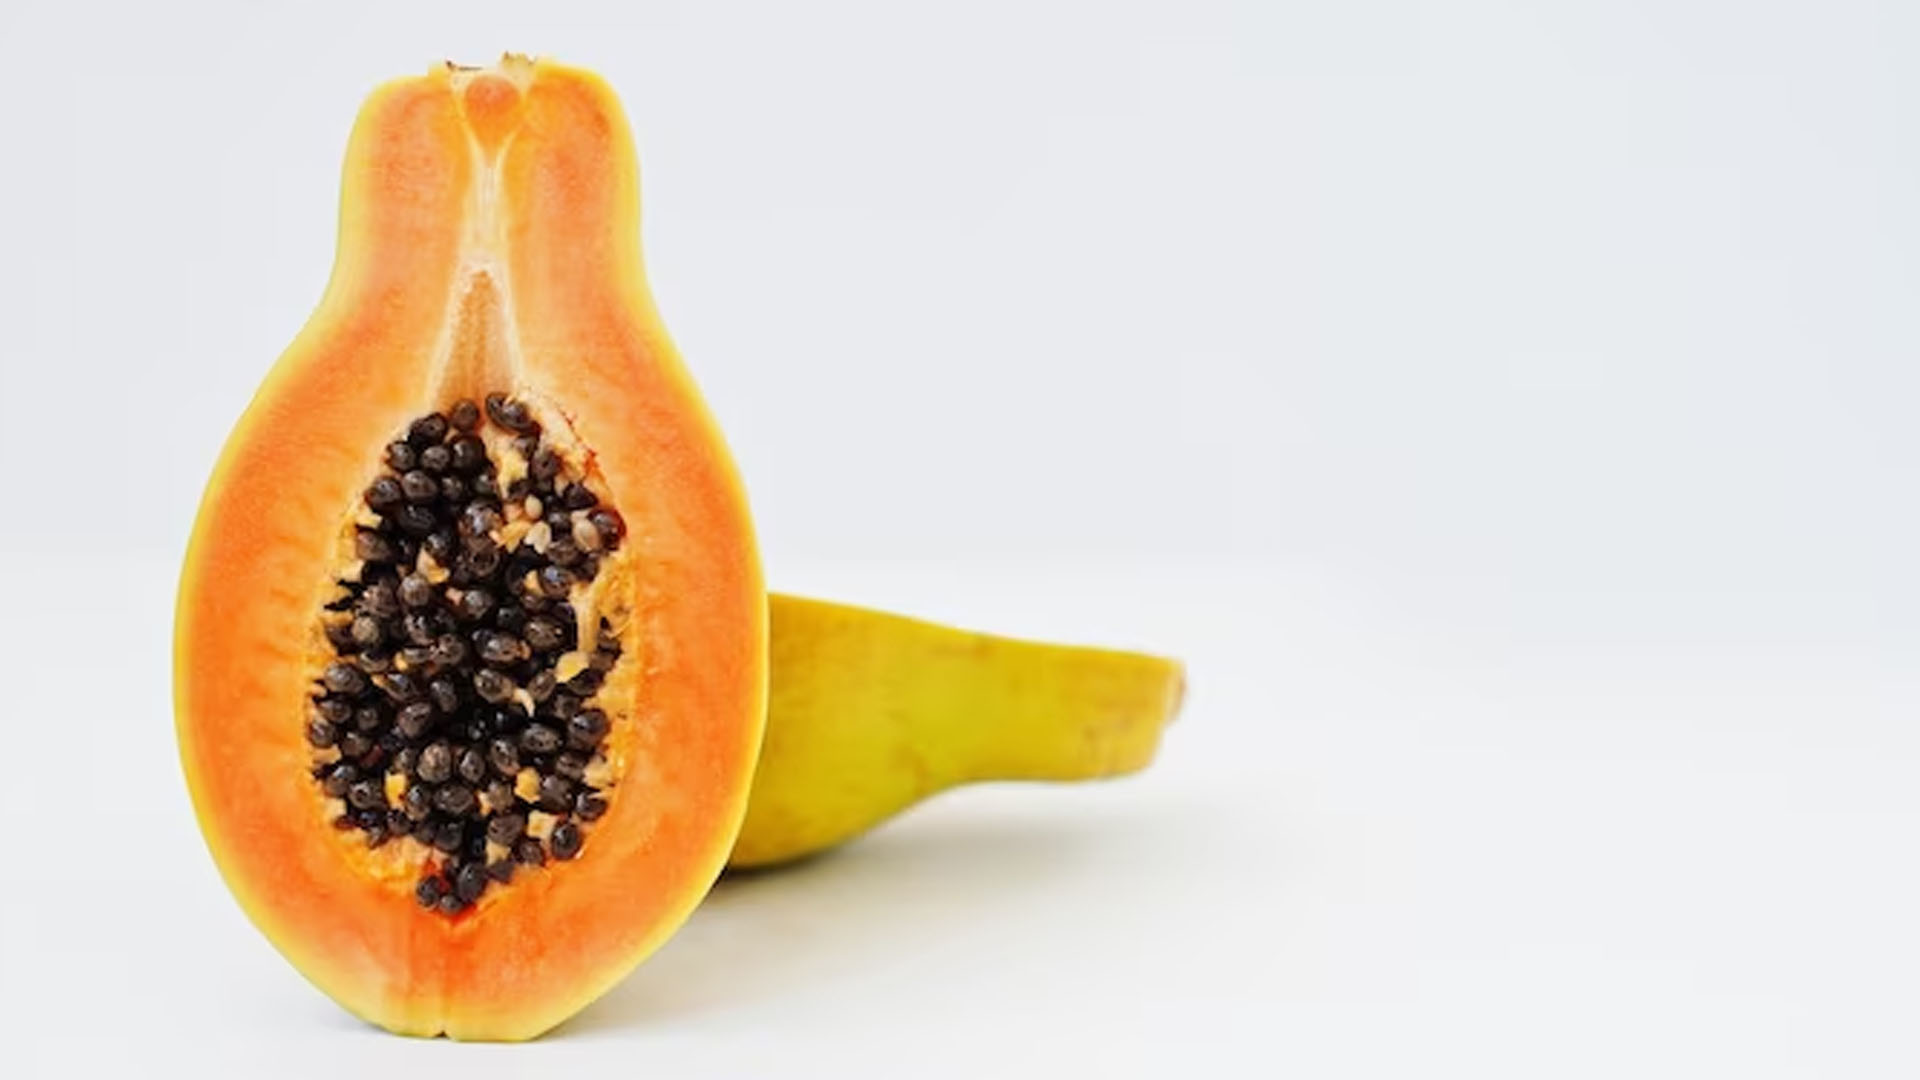 What Are Some Health Benefits Of Papaya Seeds?